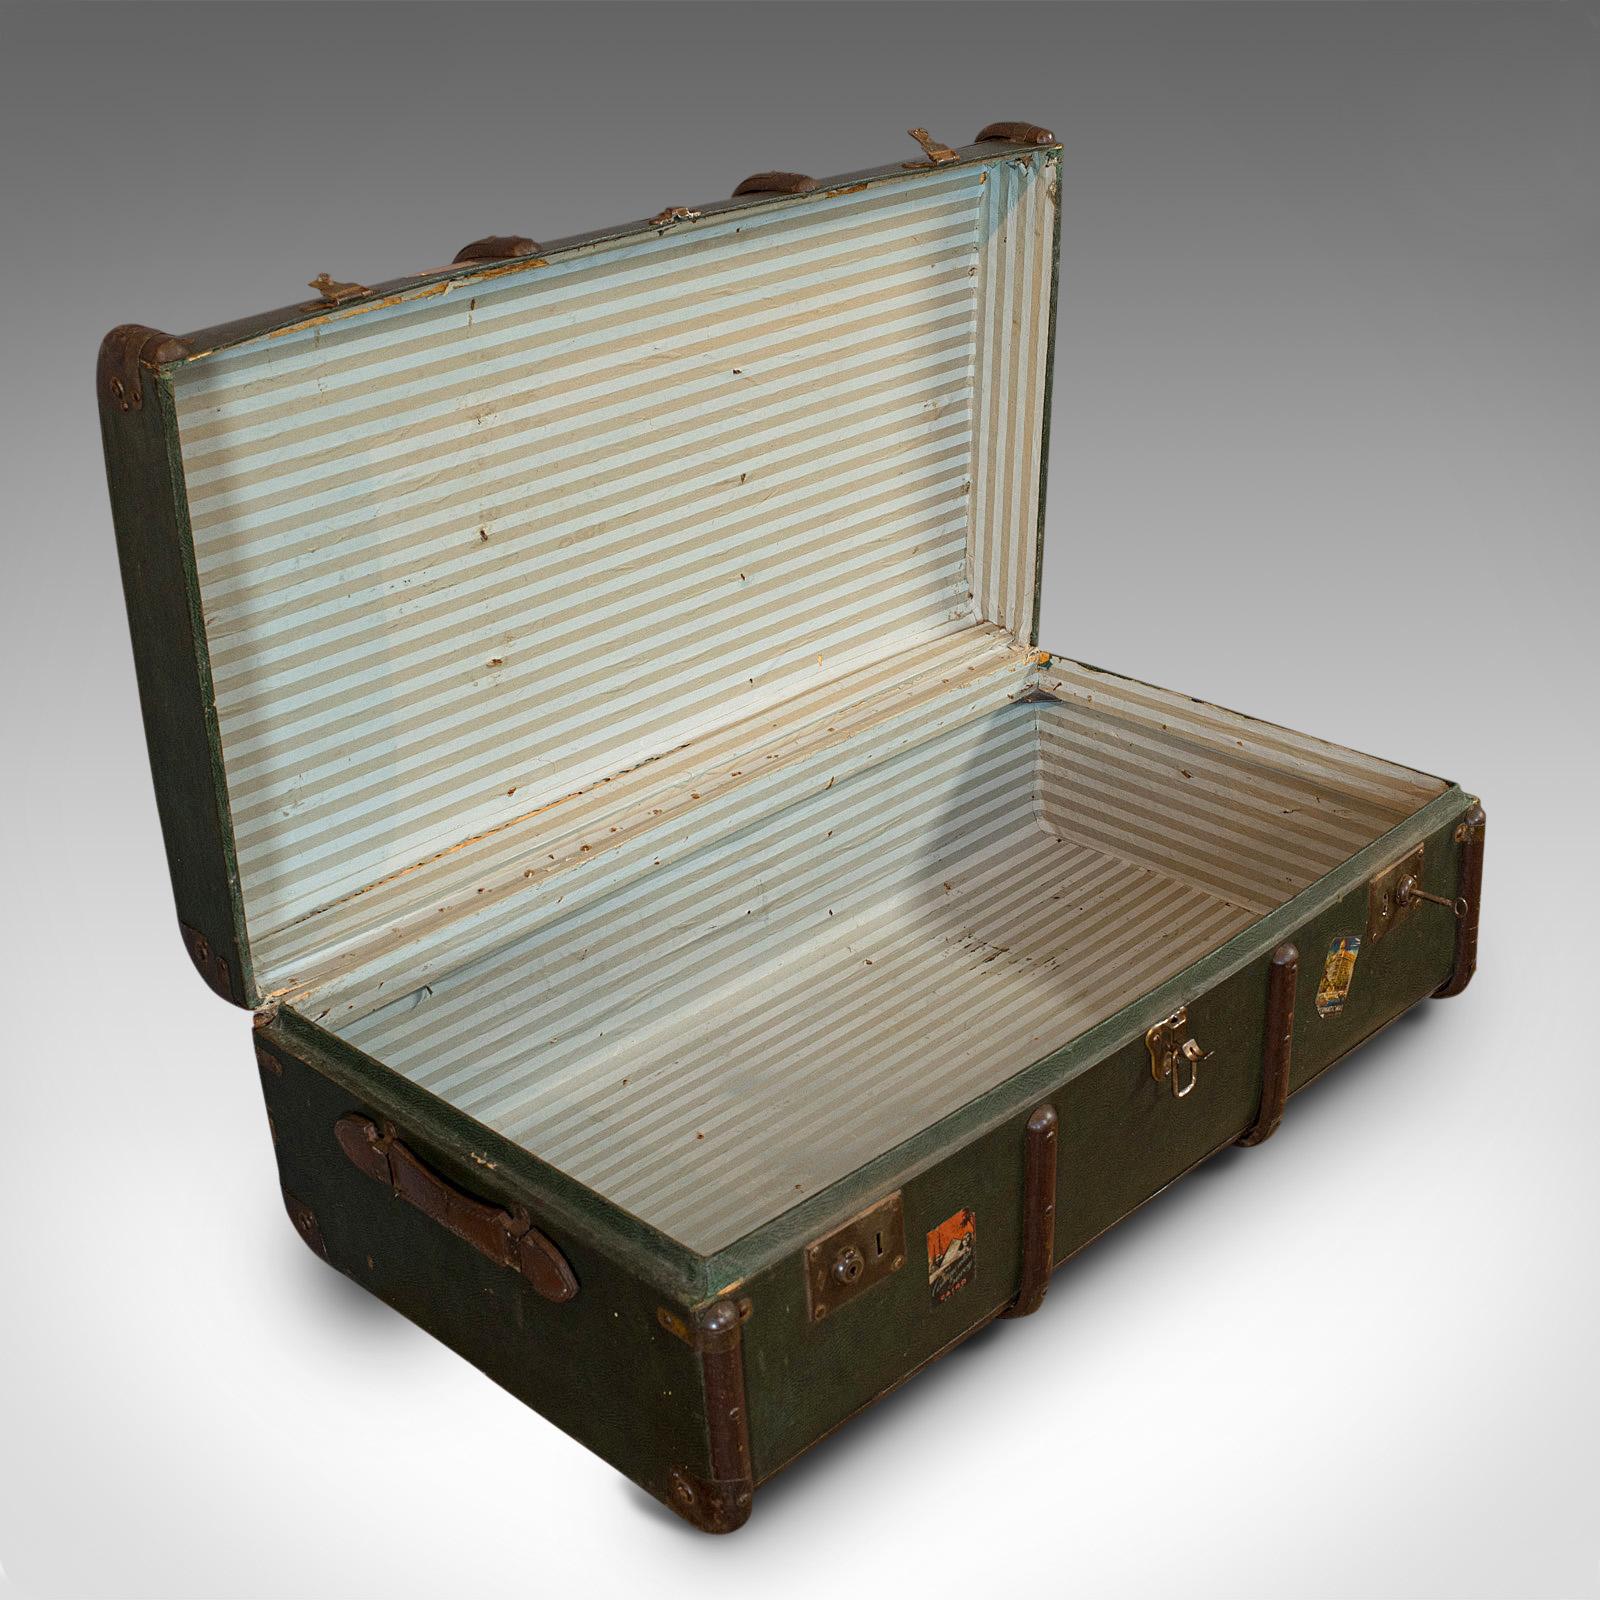 20th Century Large Antique Steamer Chest, English, Canvas, Travel Trunk, Drawco, Edwardian